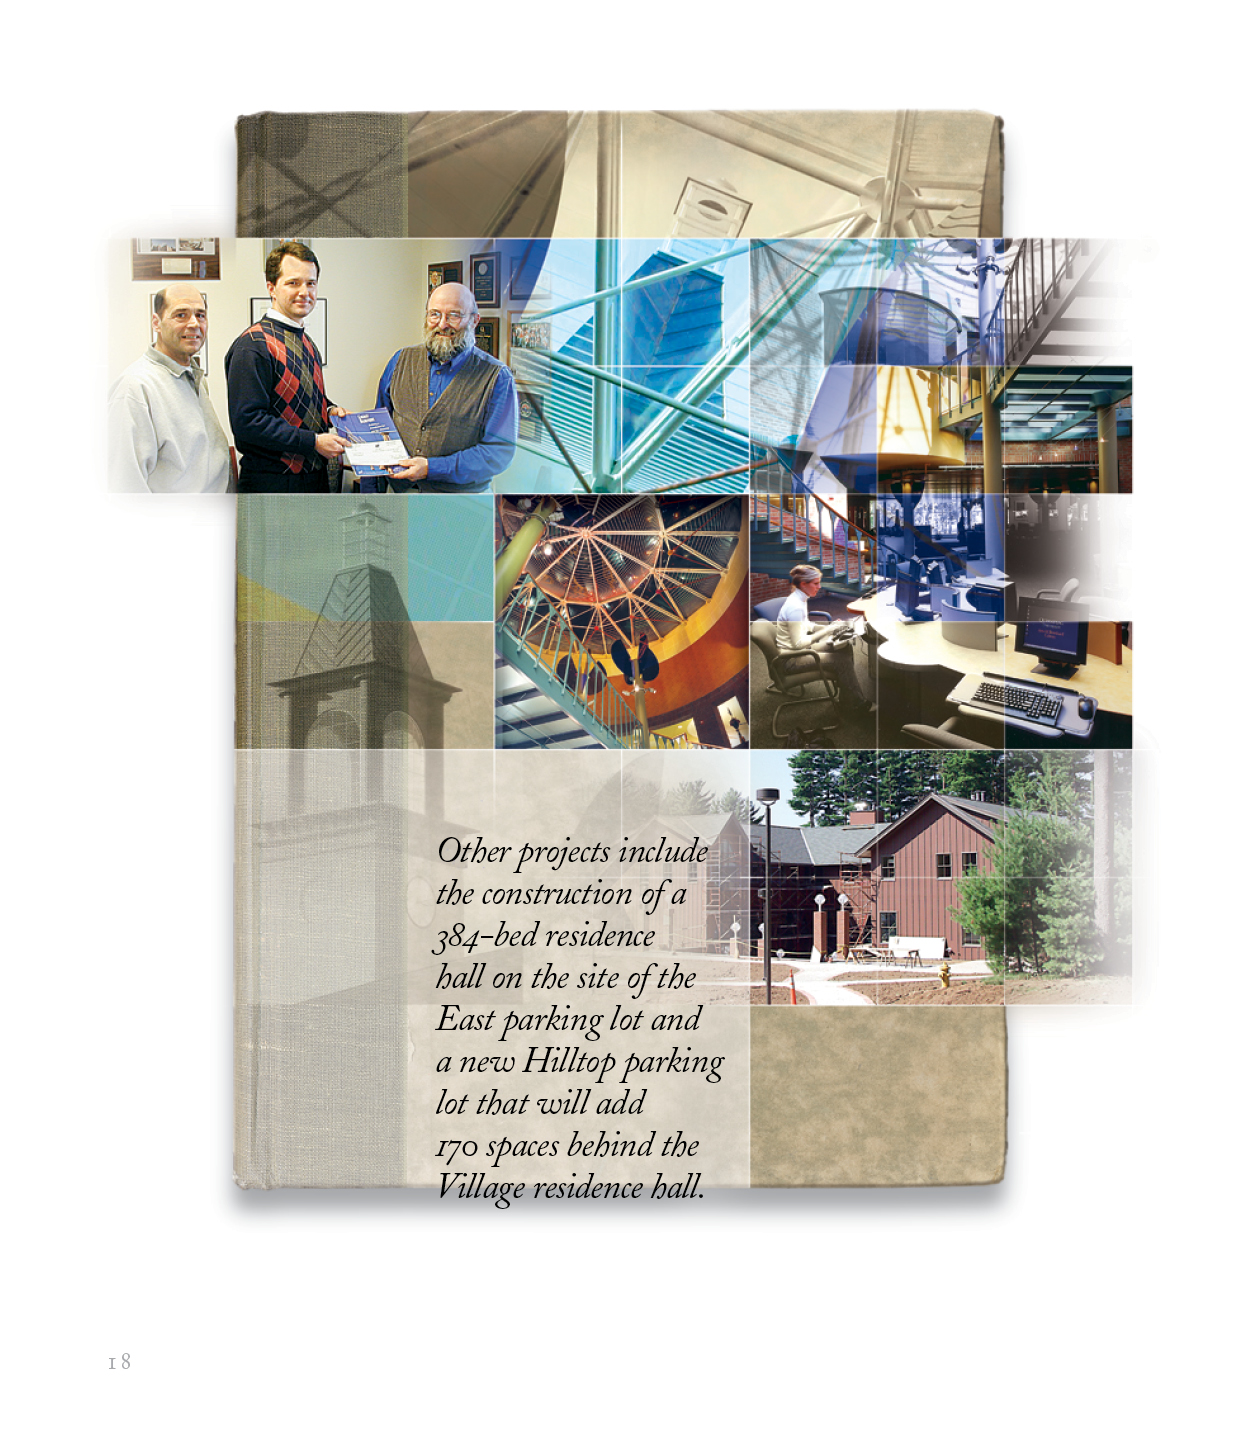 Quinnipac University Photo Montages for Annual Report by Paul Kazmercyk at Granite Bay Design